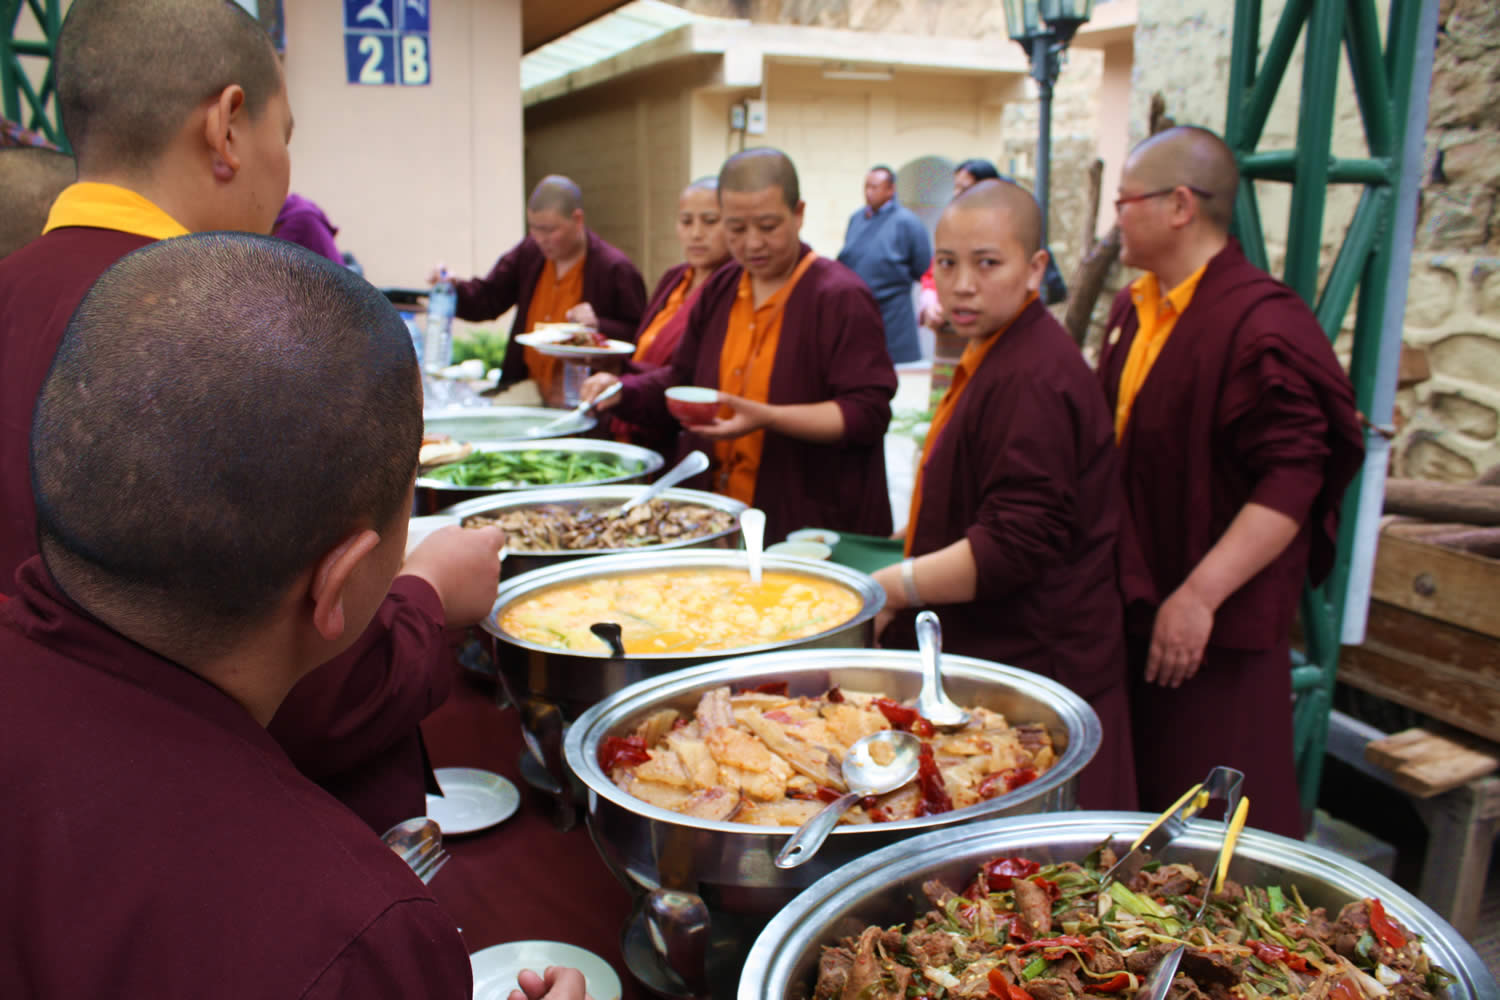 The luncheon features many delicious Bhutanese dishes.